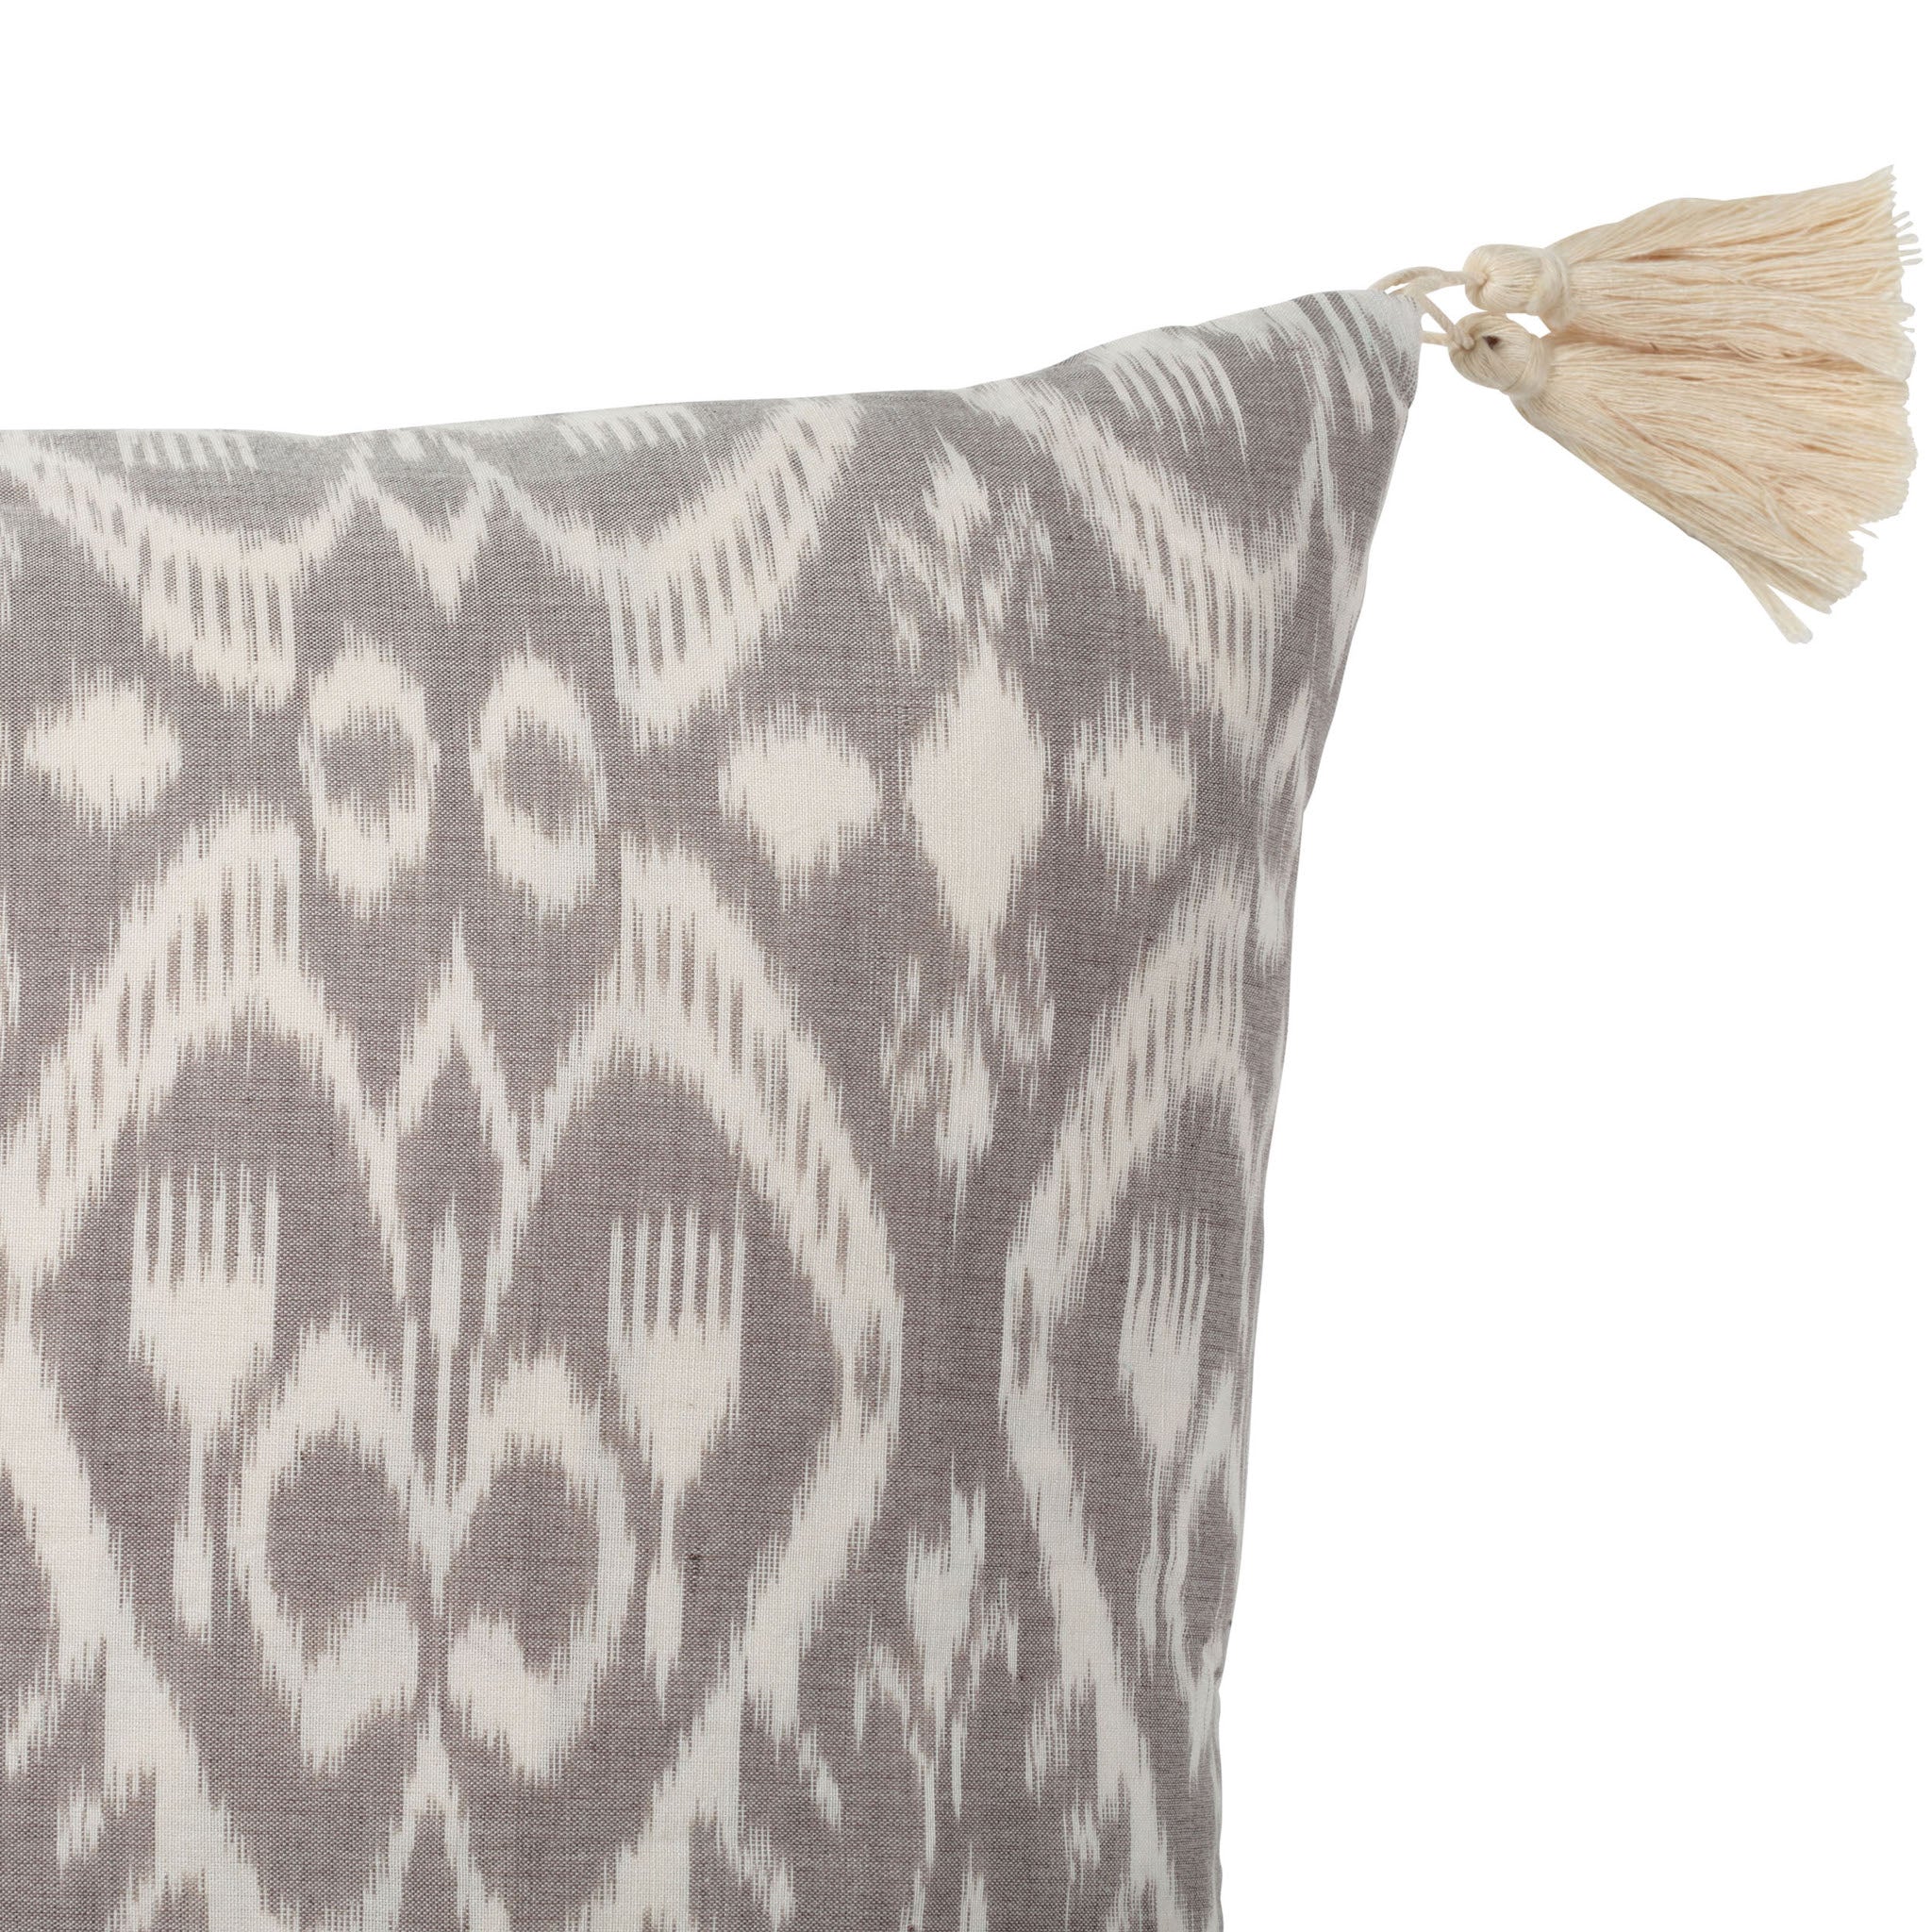 Grey and White Cotton Ikat Square Scatter Cushion with Tassels from Bali, Indonesia - DETAIL